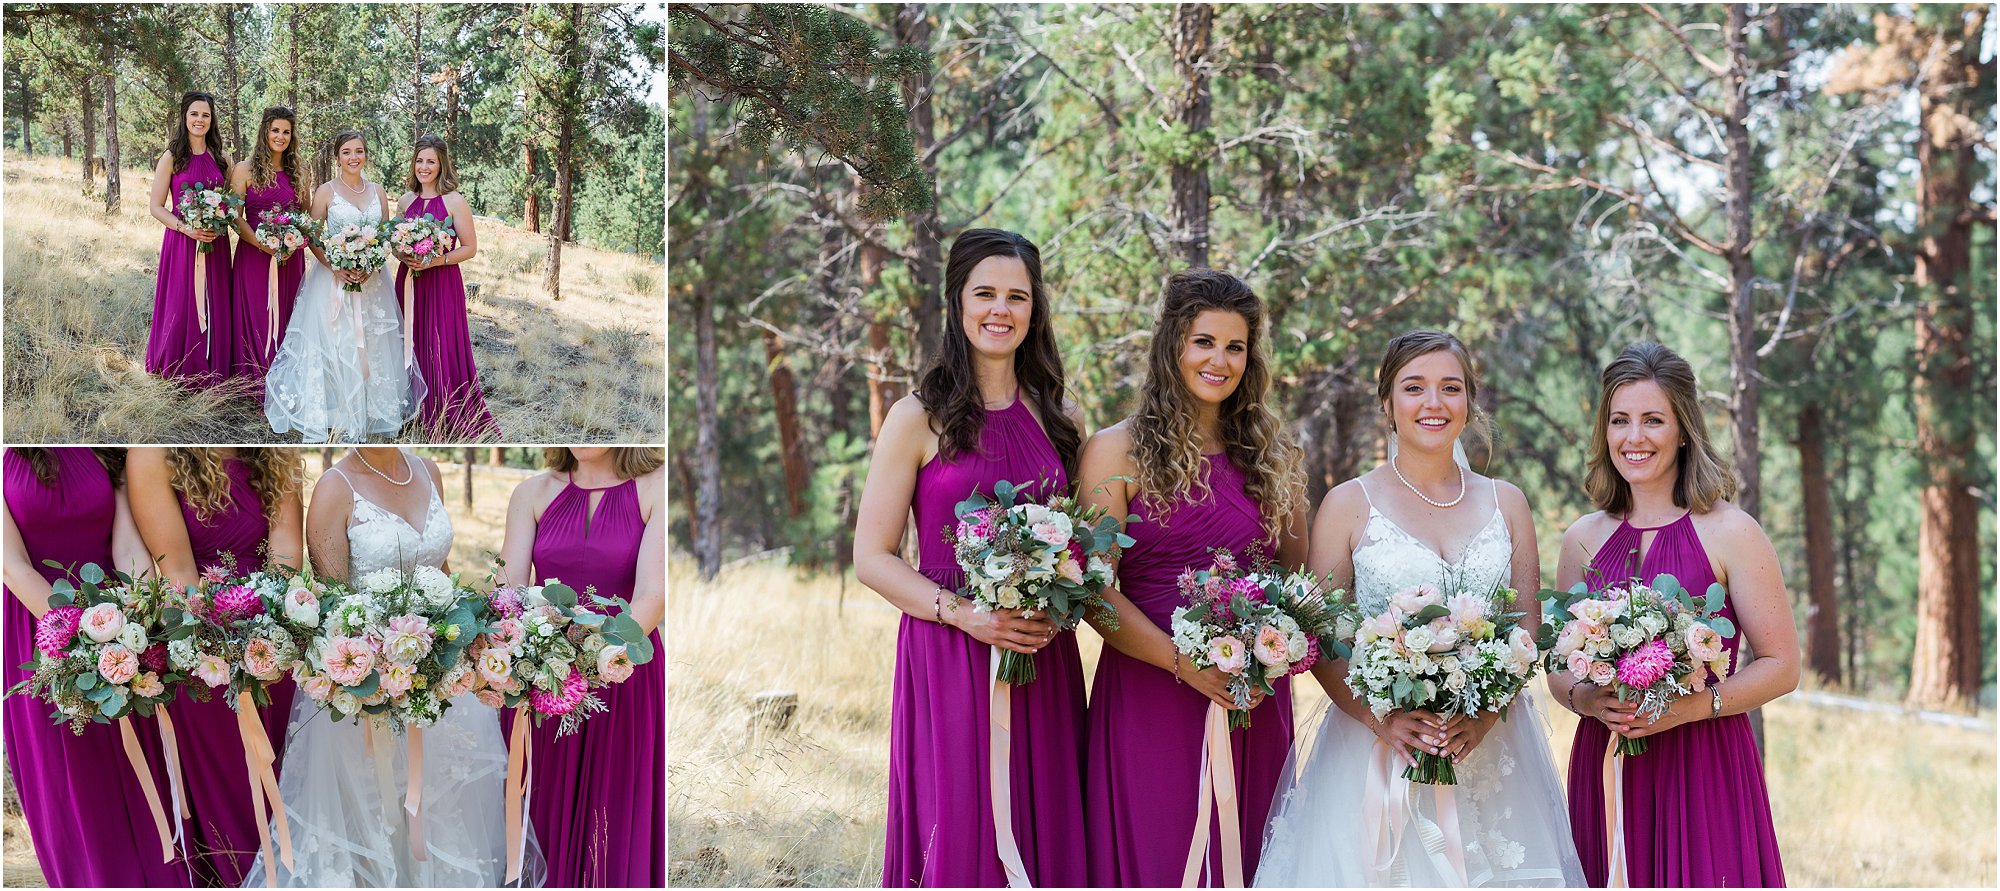 Gorgeous bridesmaids wearing mauve dresses hold their heirloom floral bouquets with the beautiful bride at her Rock Springs Ranch wedding in Bend, OR. | Erica Swantek Photography